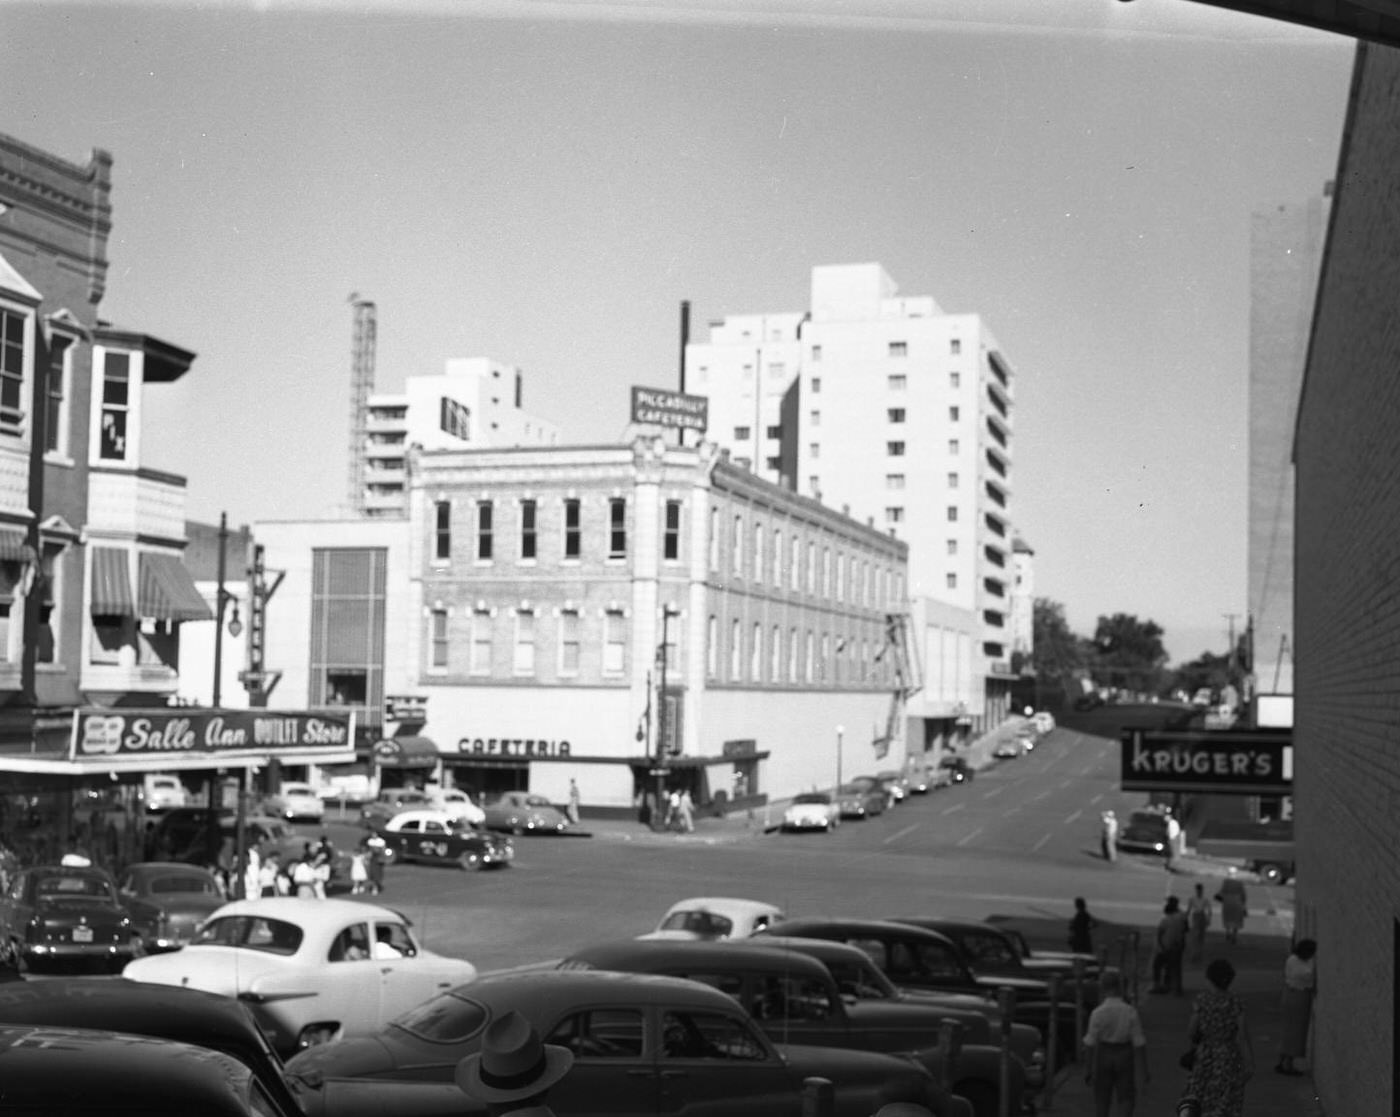 Construction Site View from 100 Block of W. 8th St, 1951.